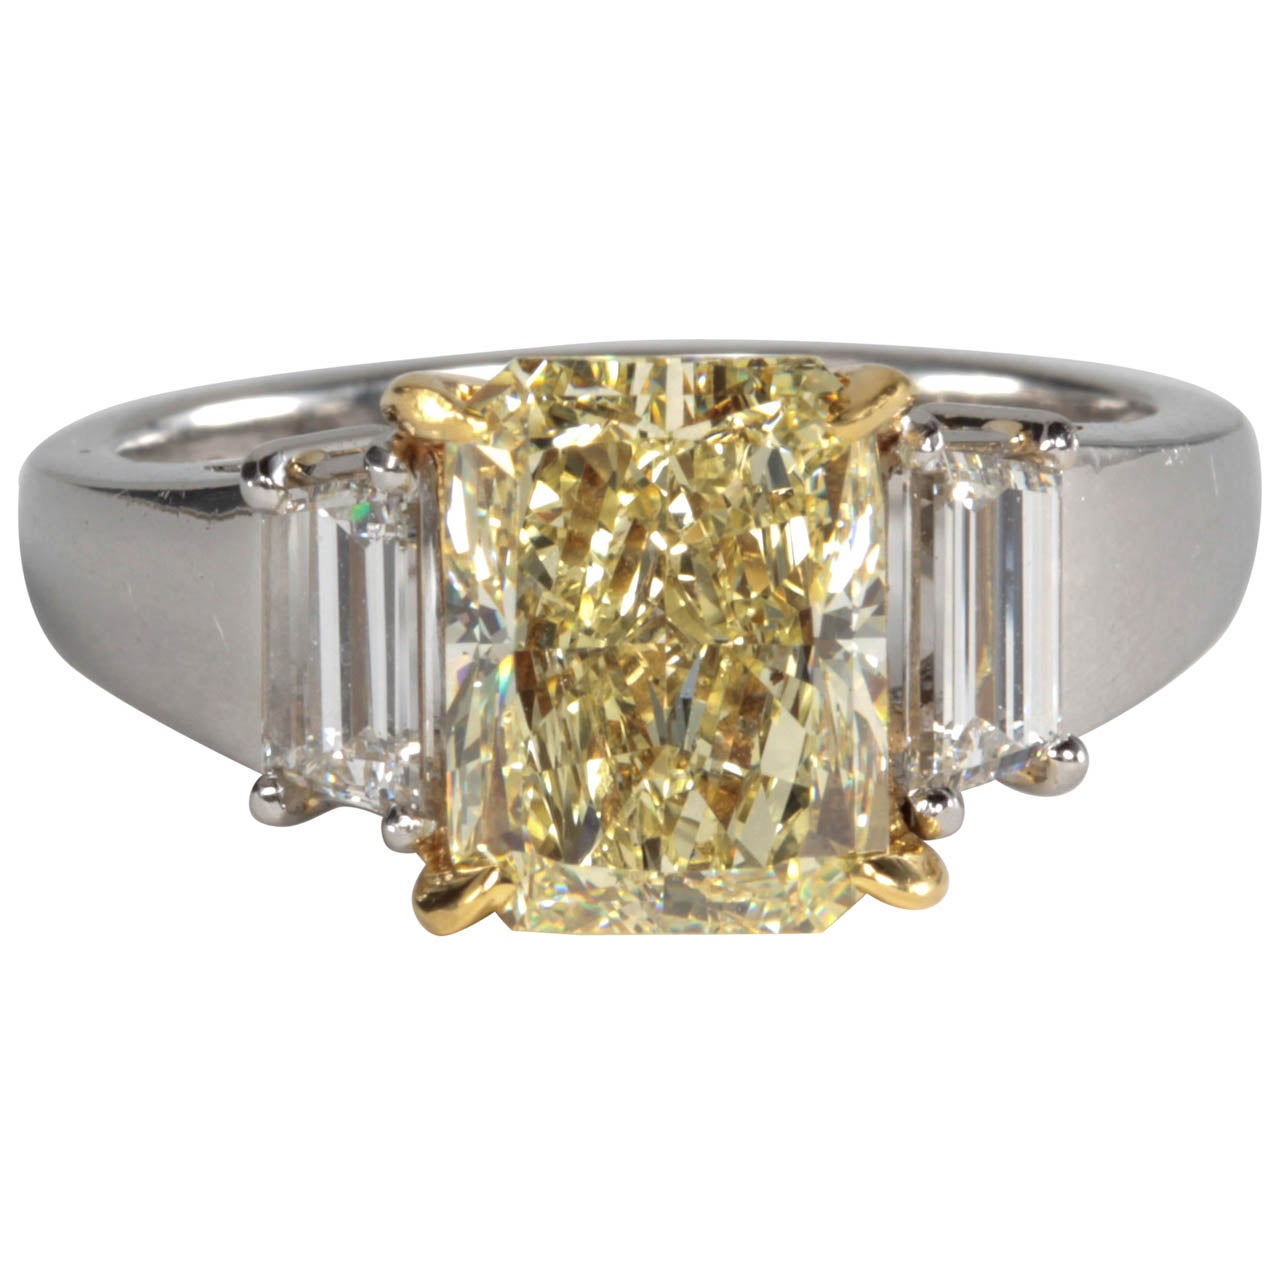 Unique GIA Fancy Light Yellow Diamond Engagement Ring For Sale